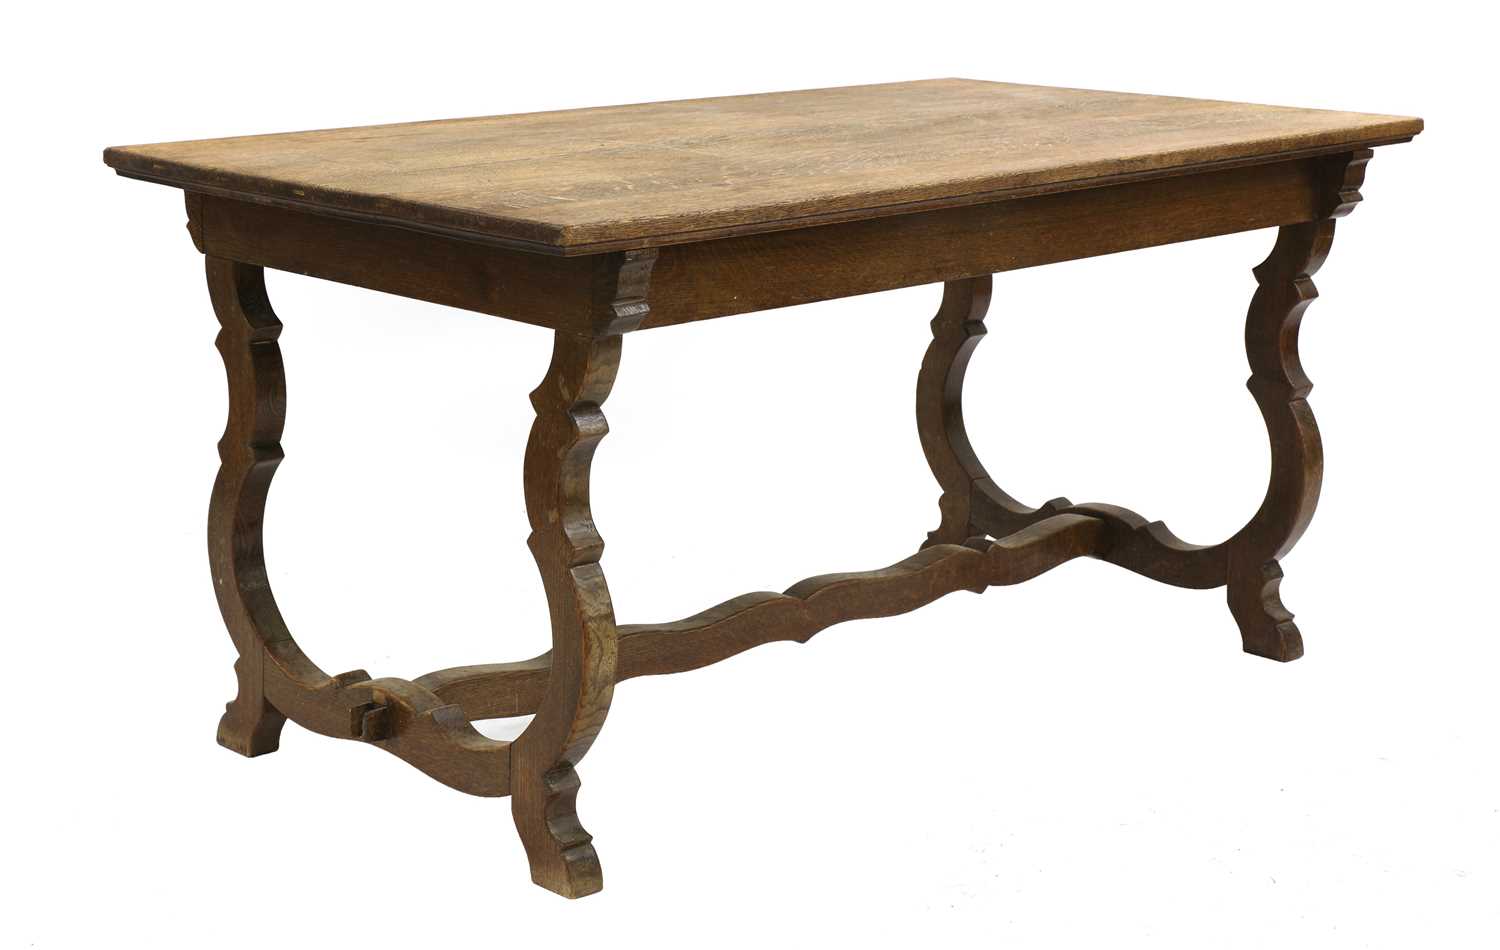 Lot 40 - An Arts and Crafts oak refectory table